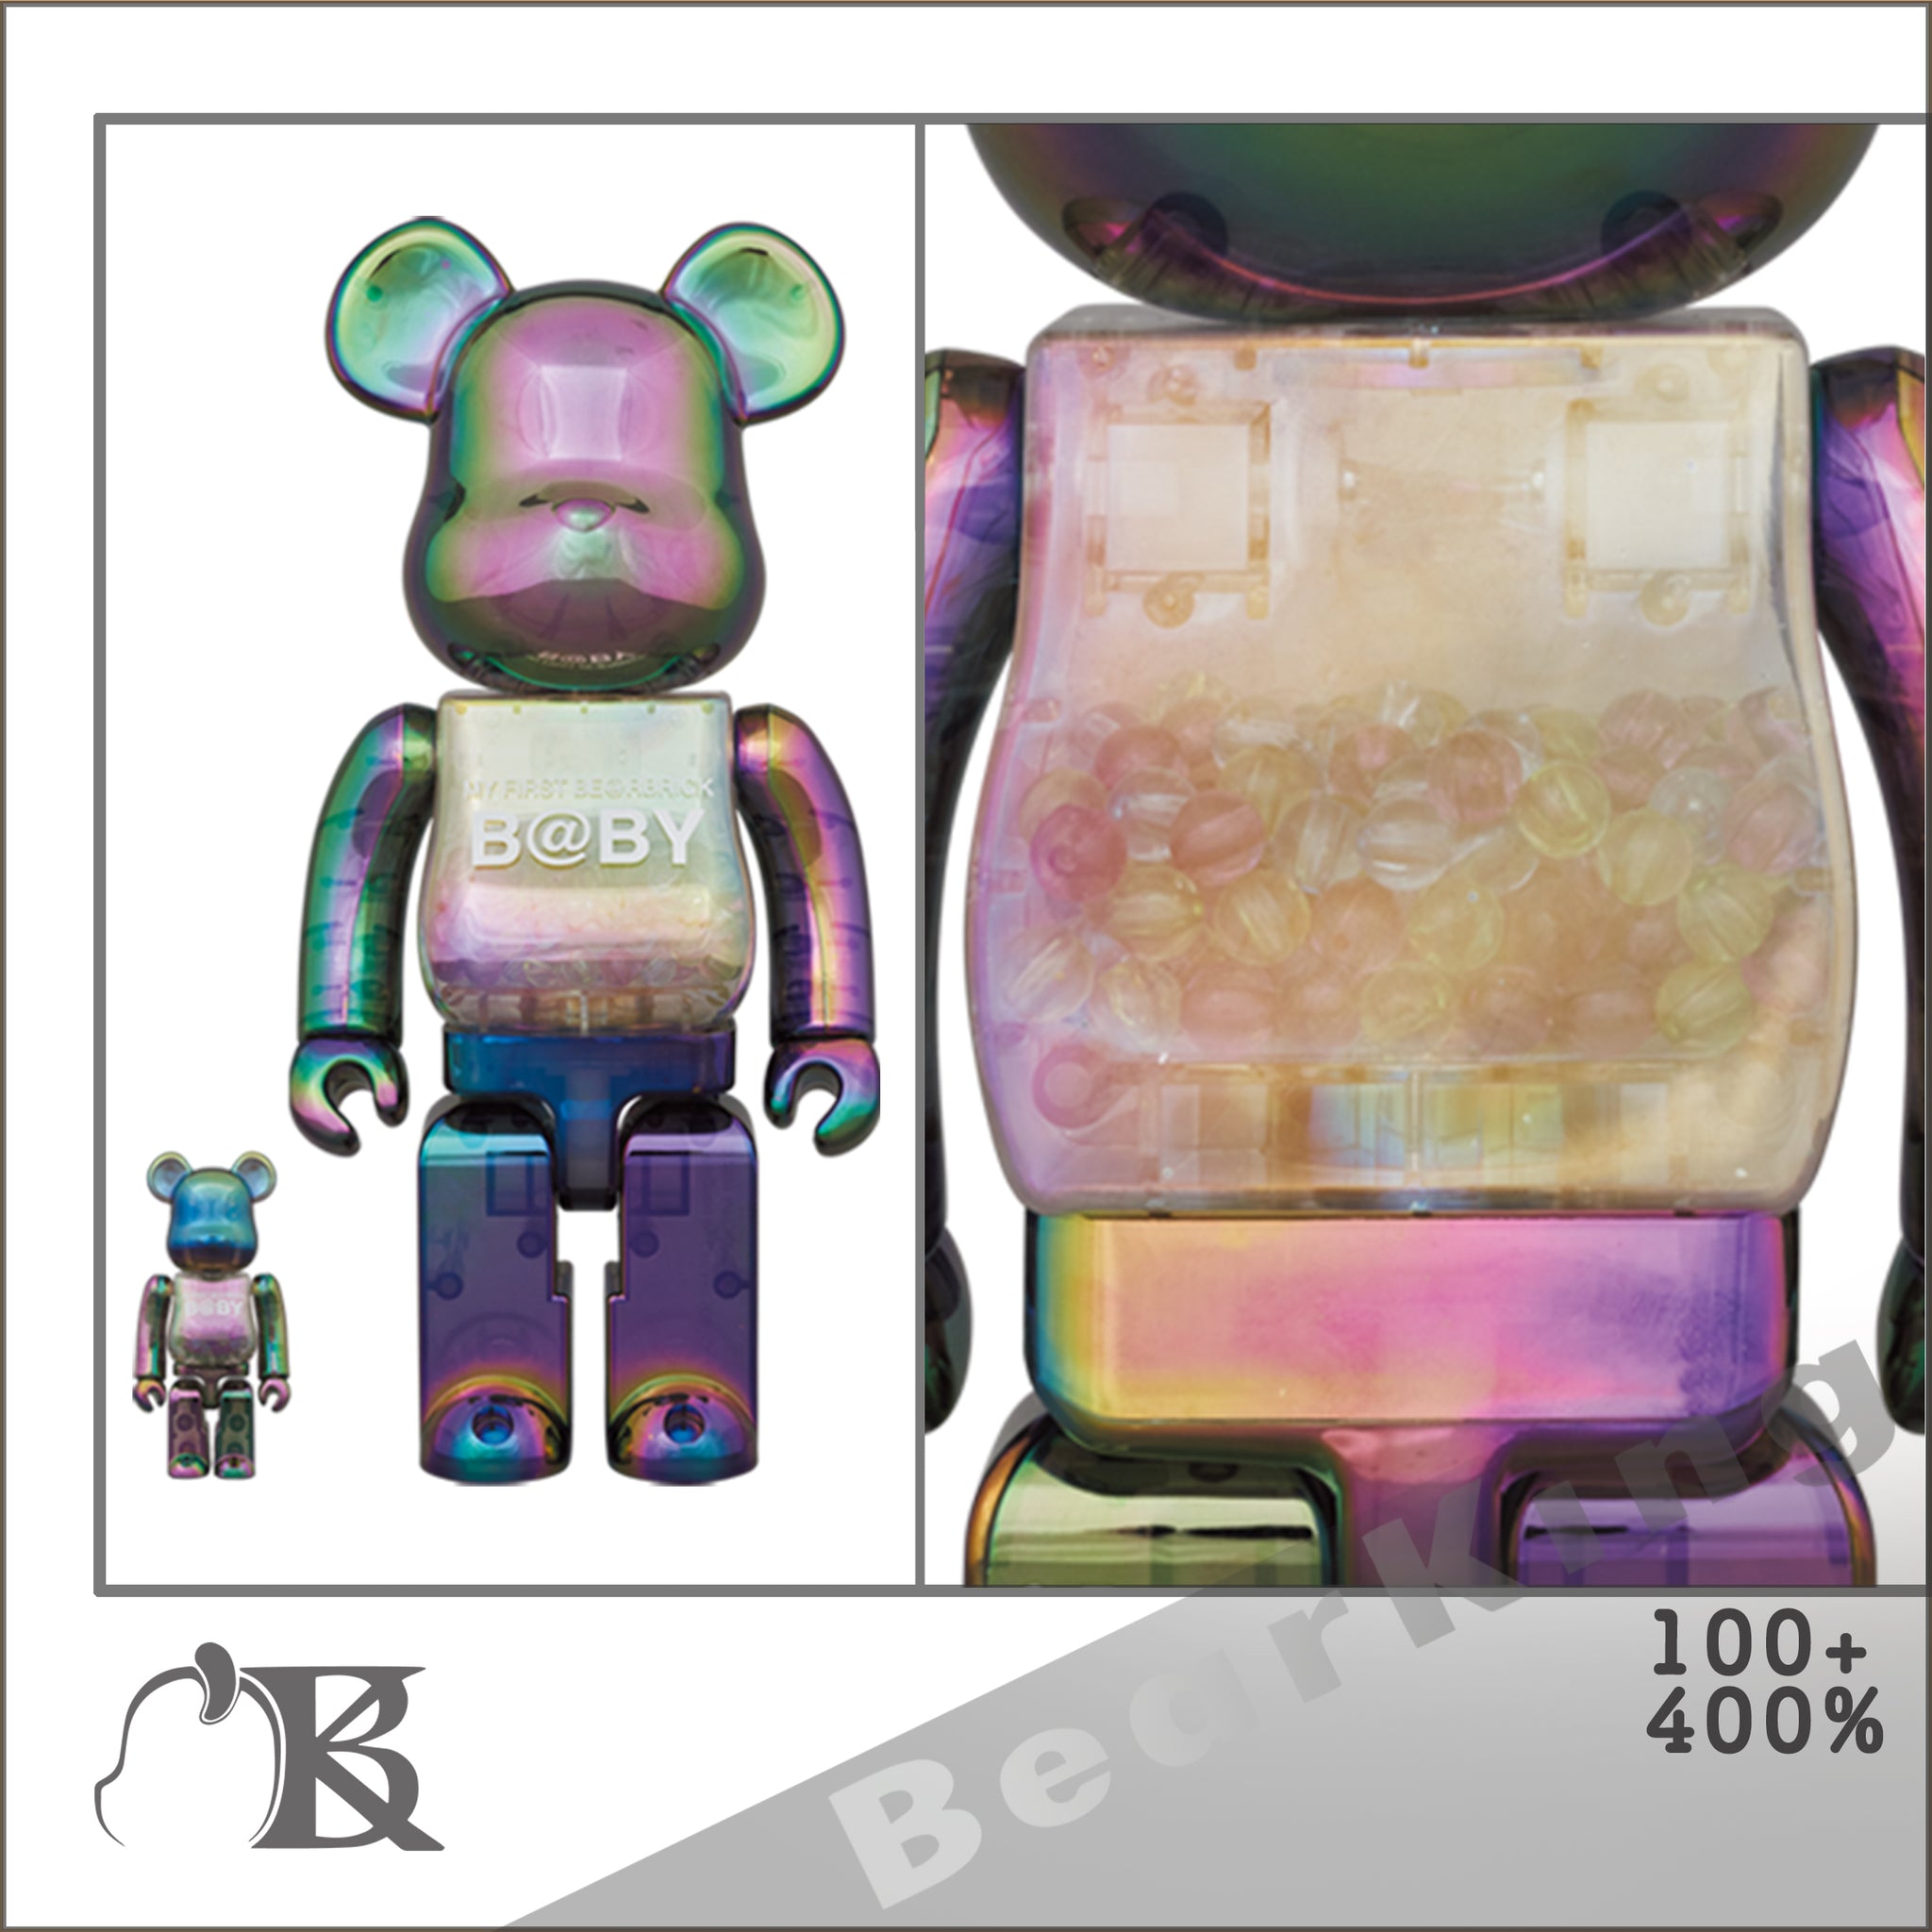 MY FIRST R@BBRICK / NY@BRICK B@BY SPACE Ver. 100％ & 400％ SET of 